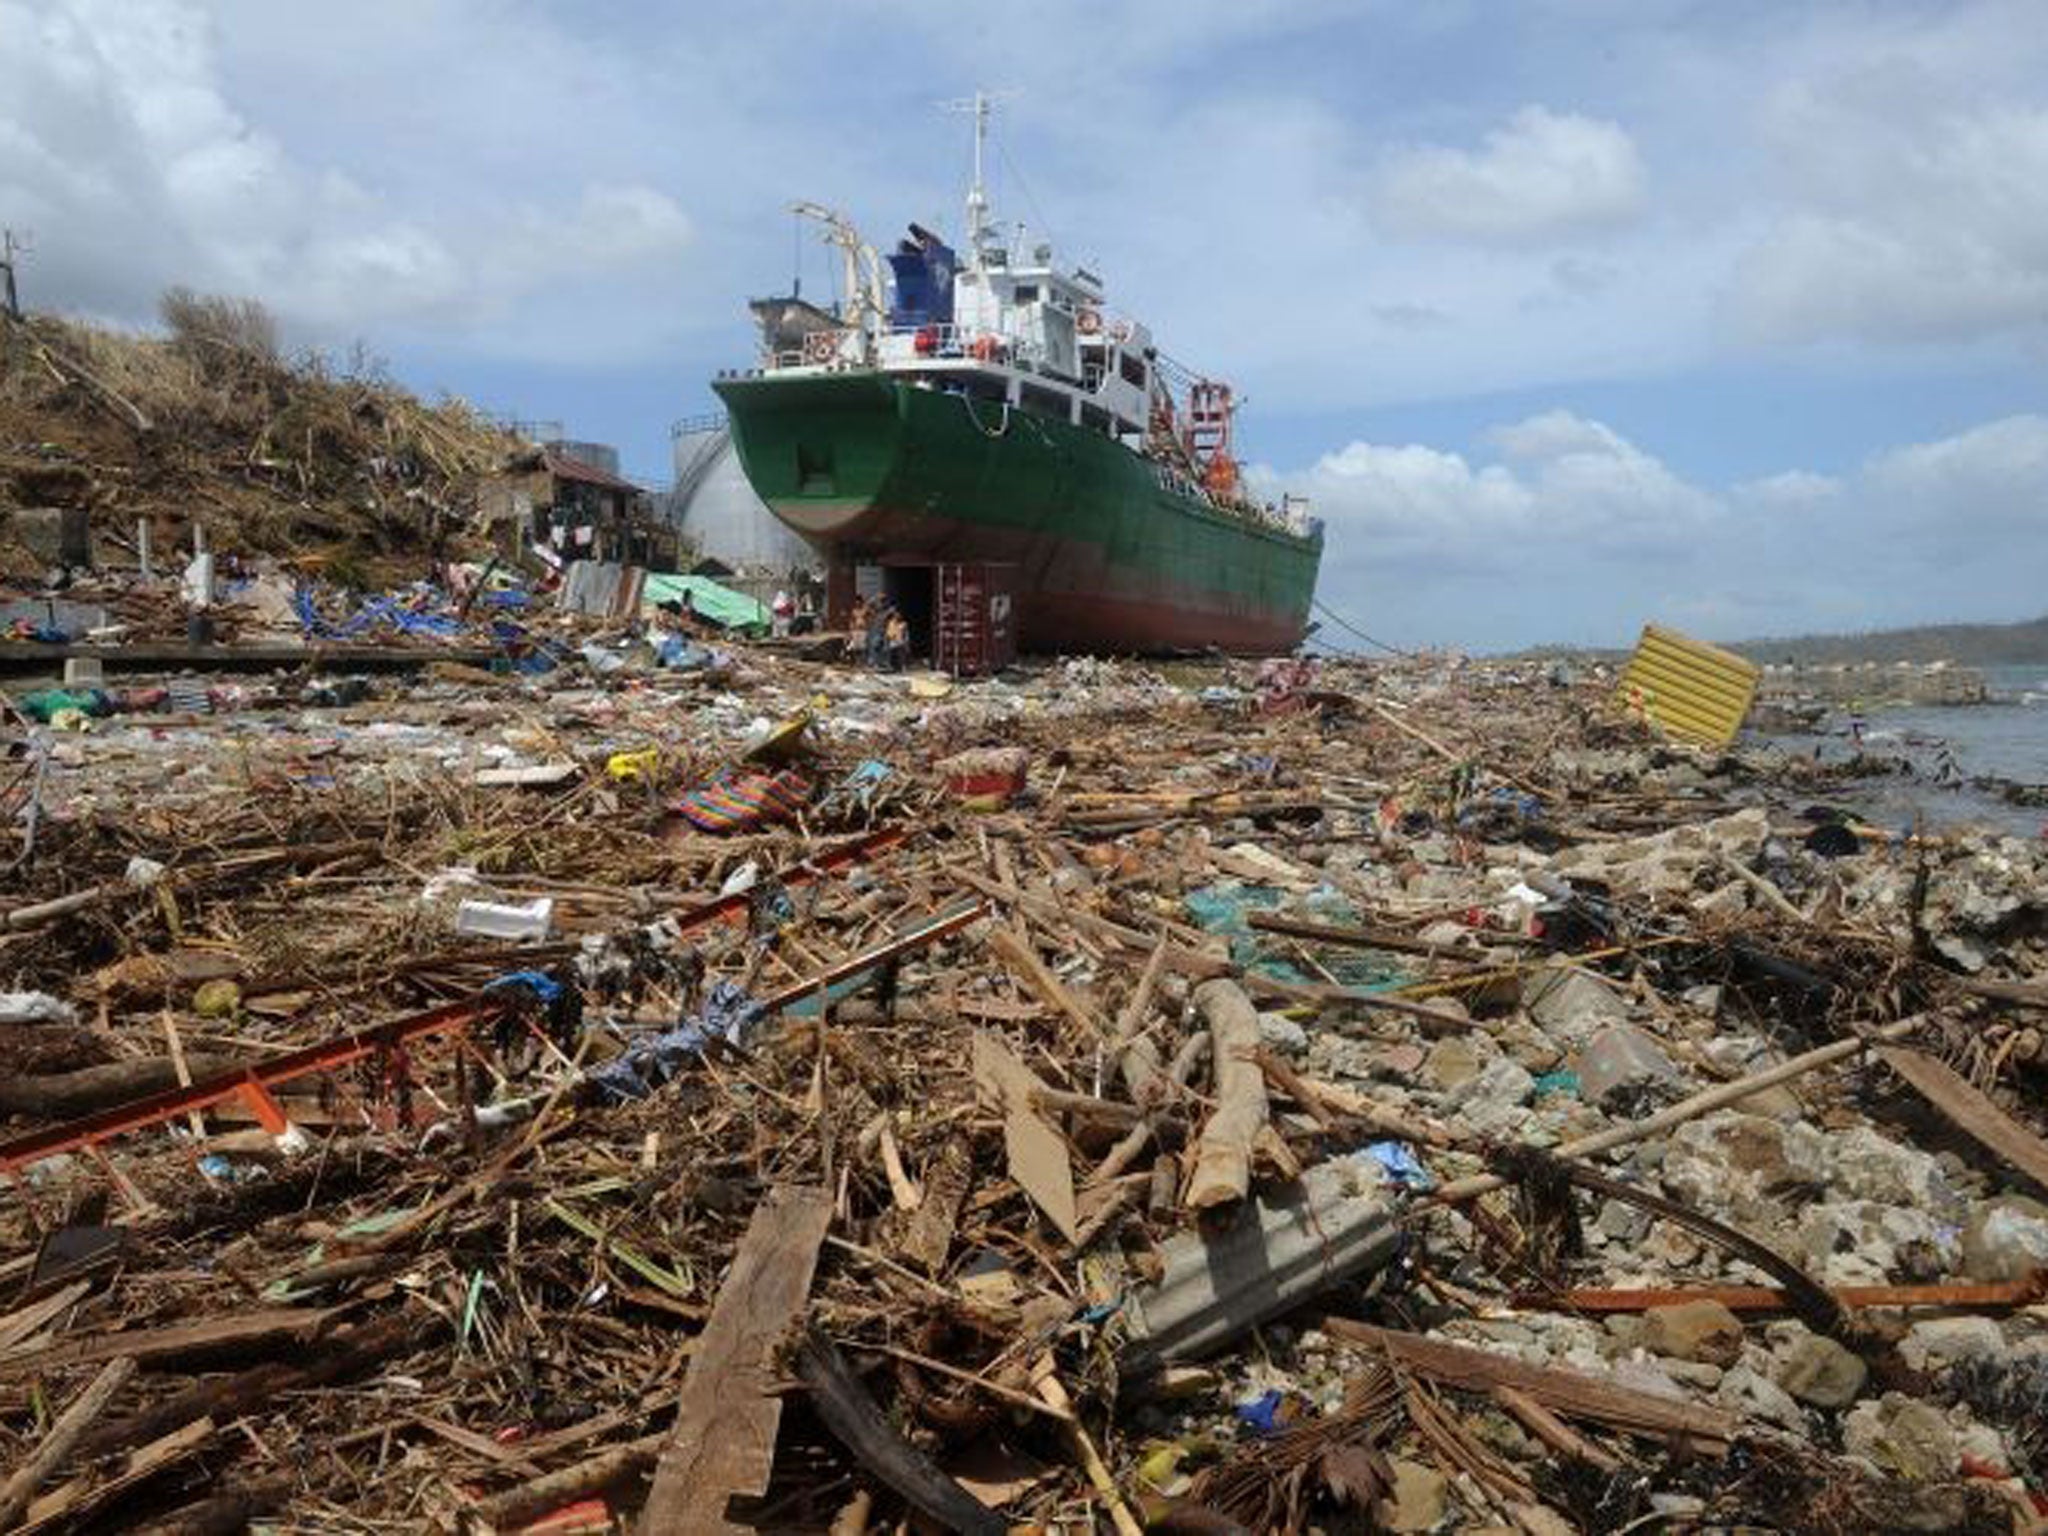 People walk amongst debris next to a ship washed ashore in the aftermath of Super Typhoon Haiyan at Anibong in Tacloban